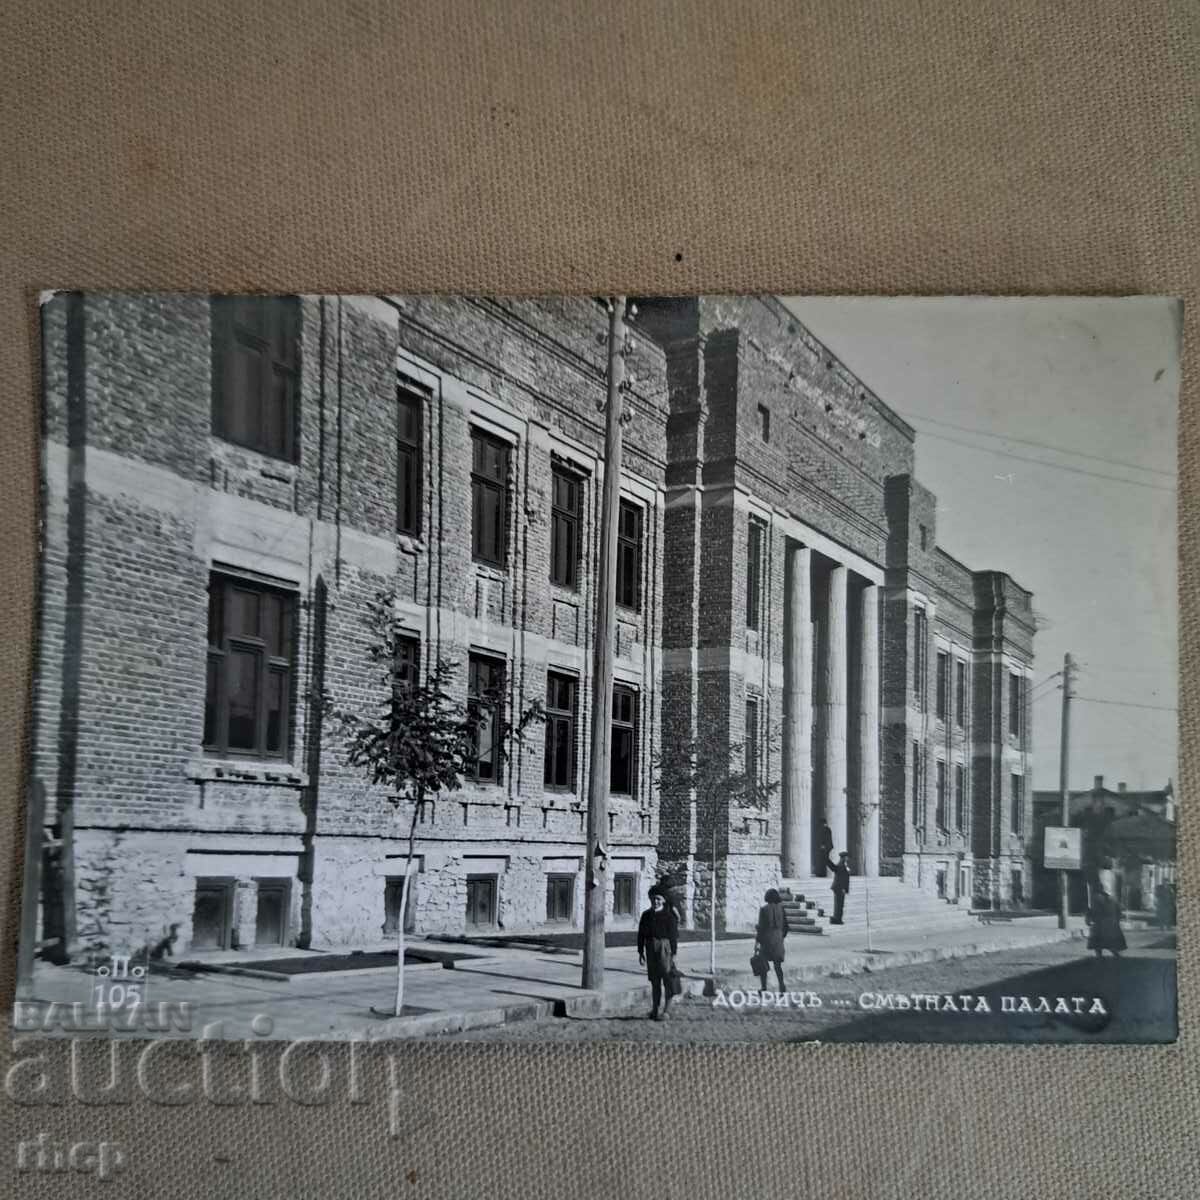 Dobrich 1940 The Audit Office photo view card